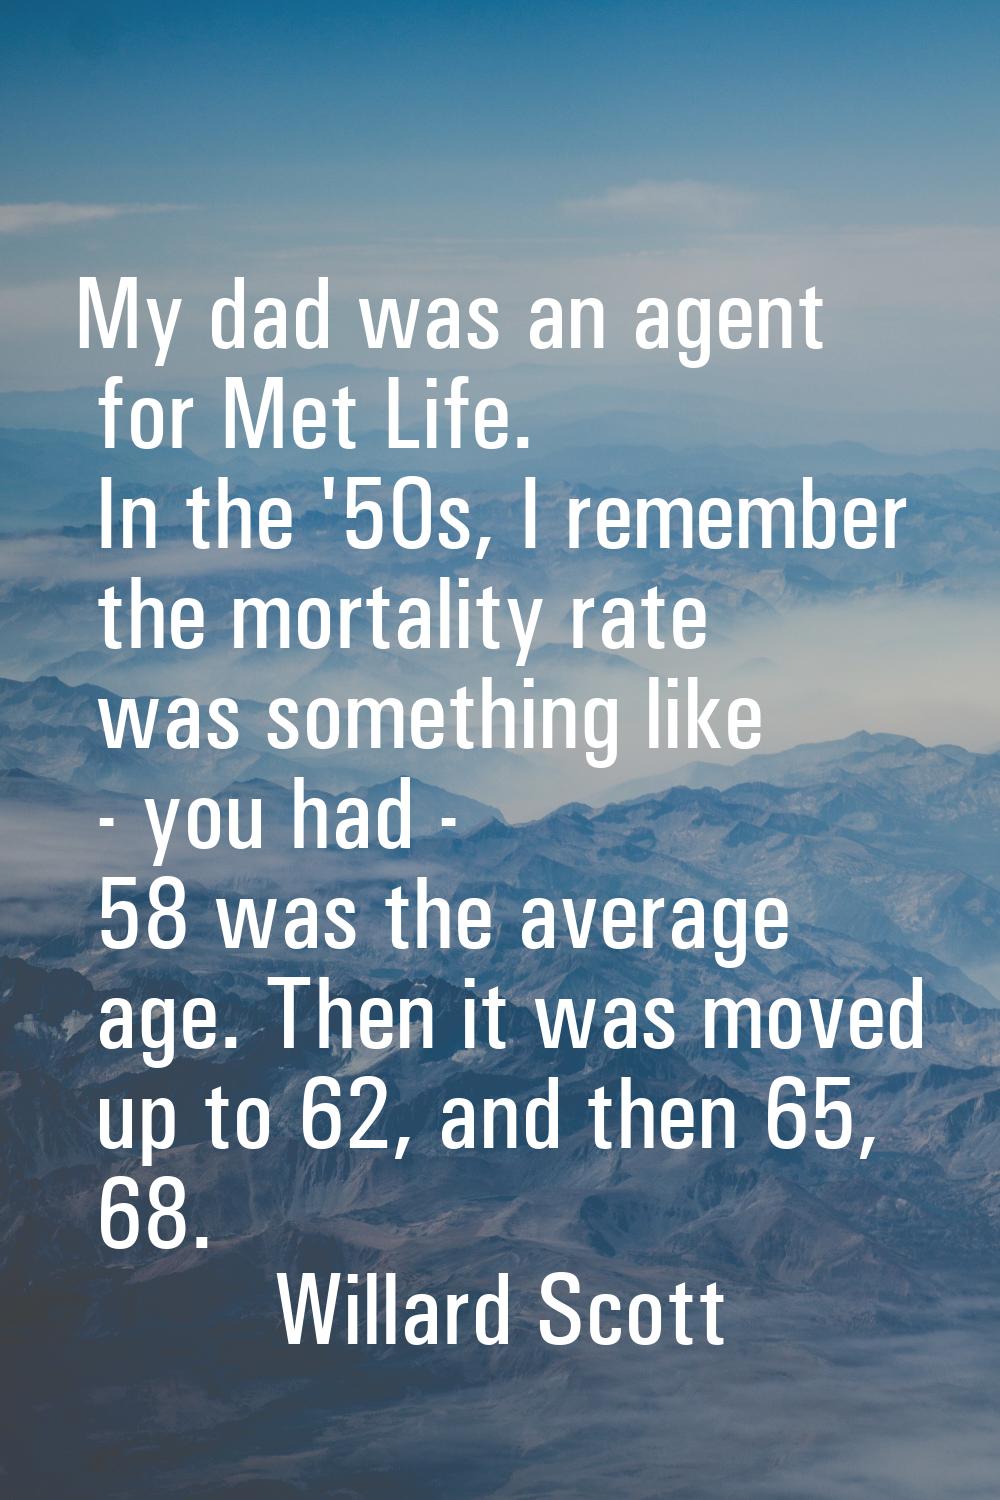 My dad was an agent for Met Life. In the '50s, I remember the mortality rate was something like - y